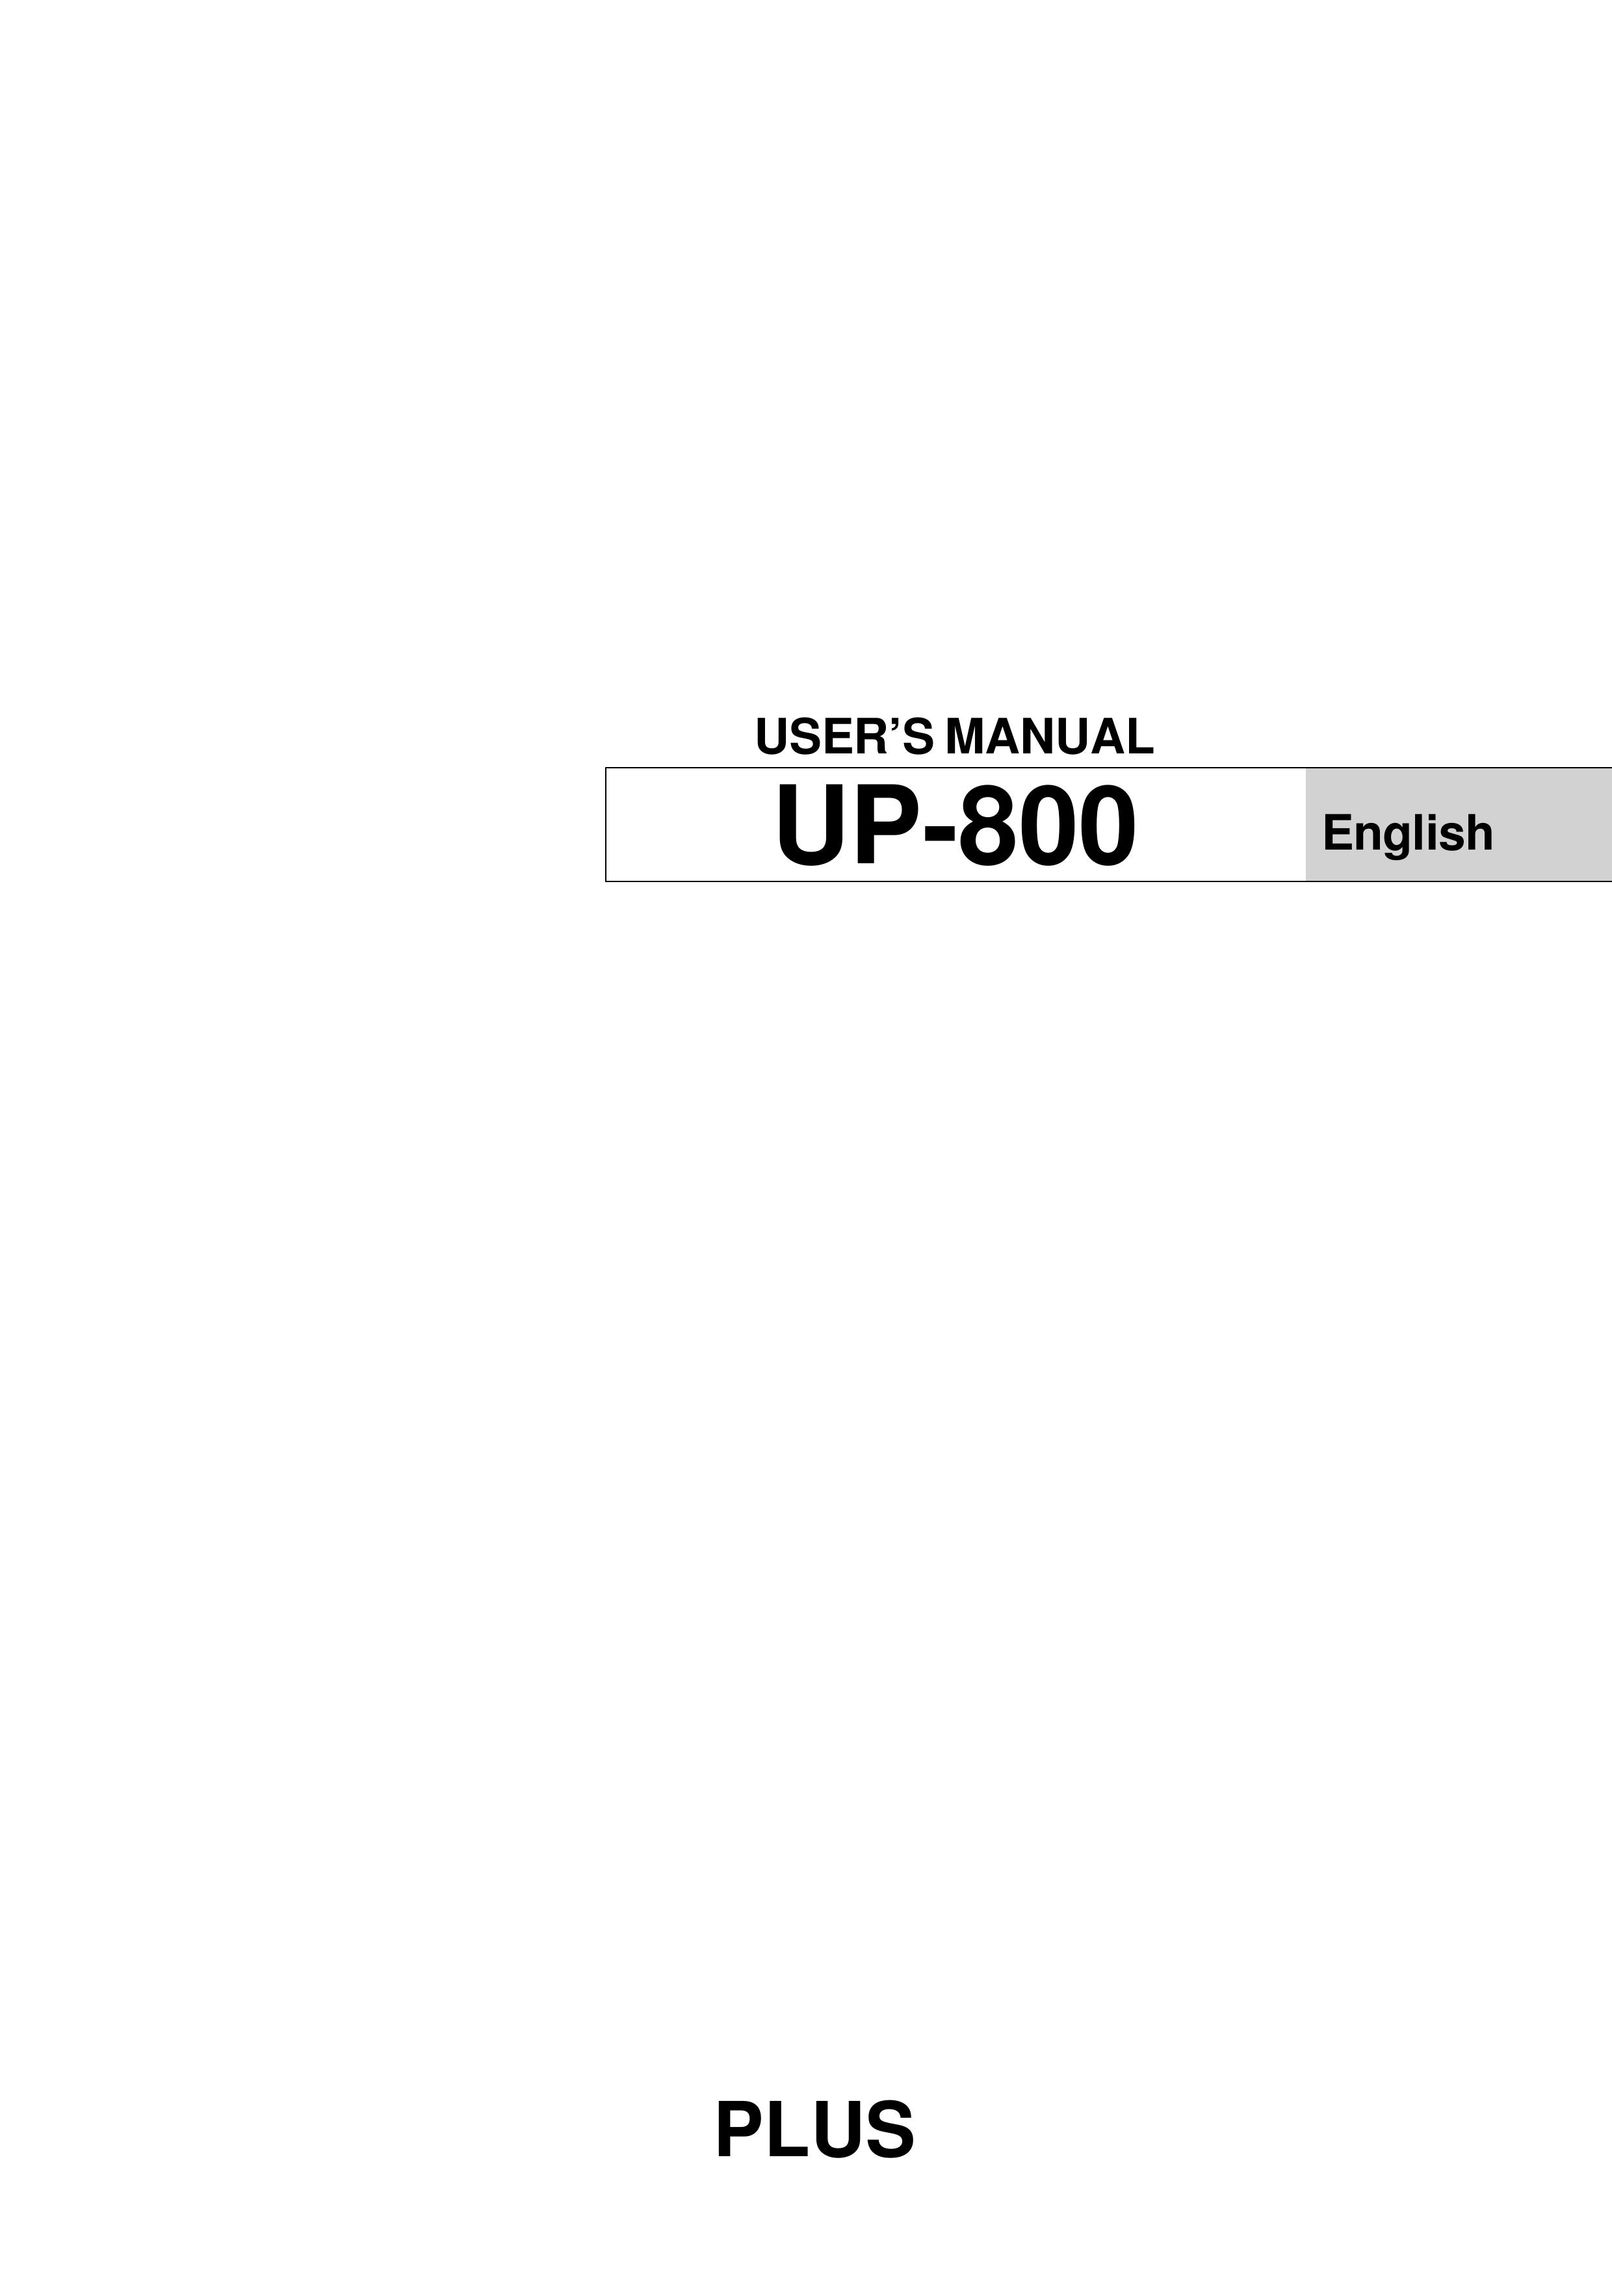 PLUS Vision UP-800 Projector User Manual